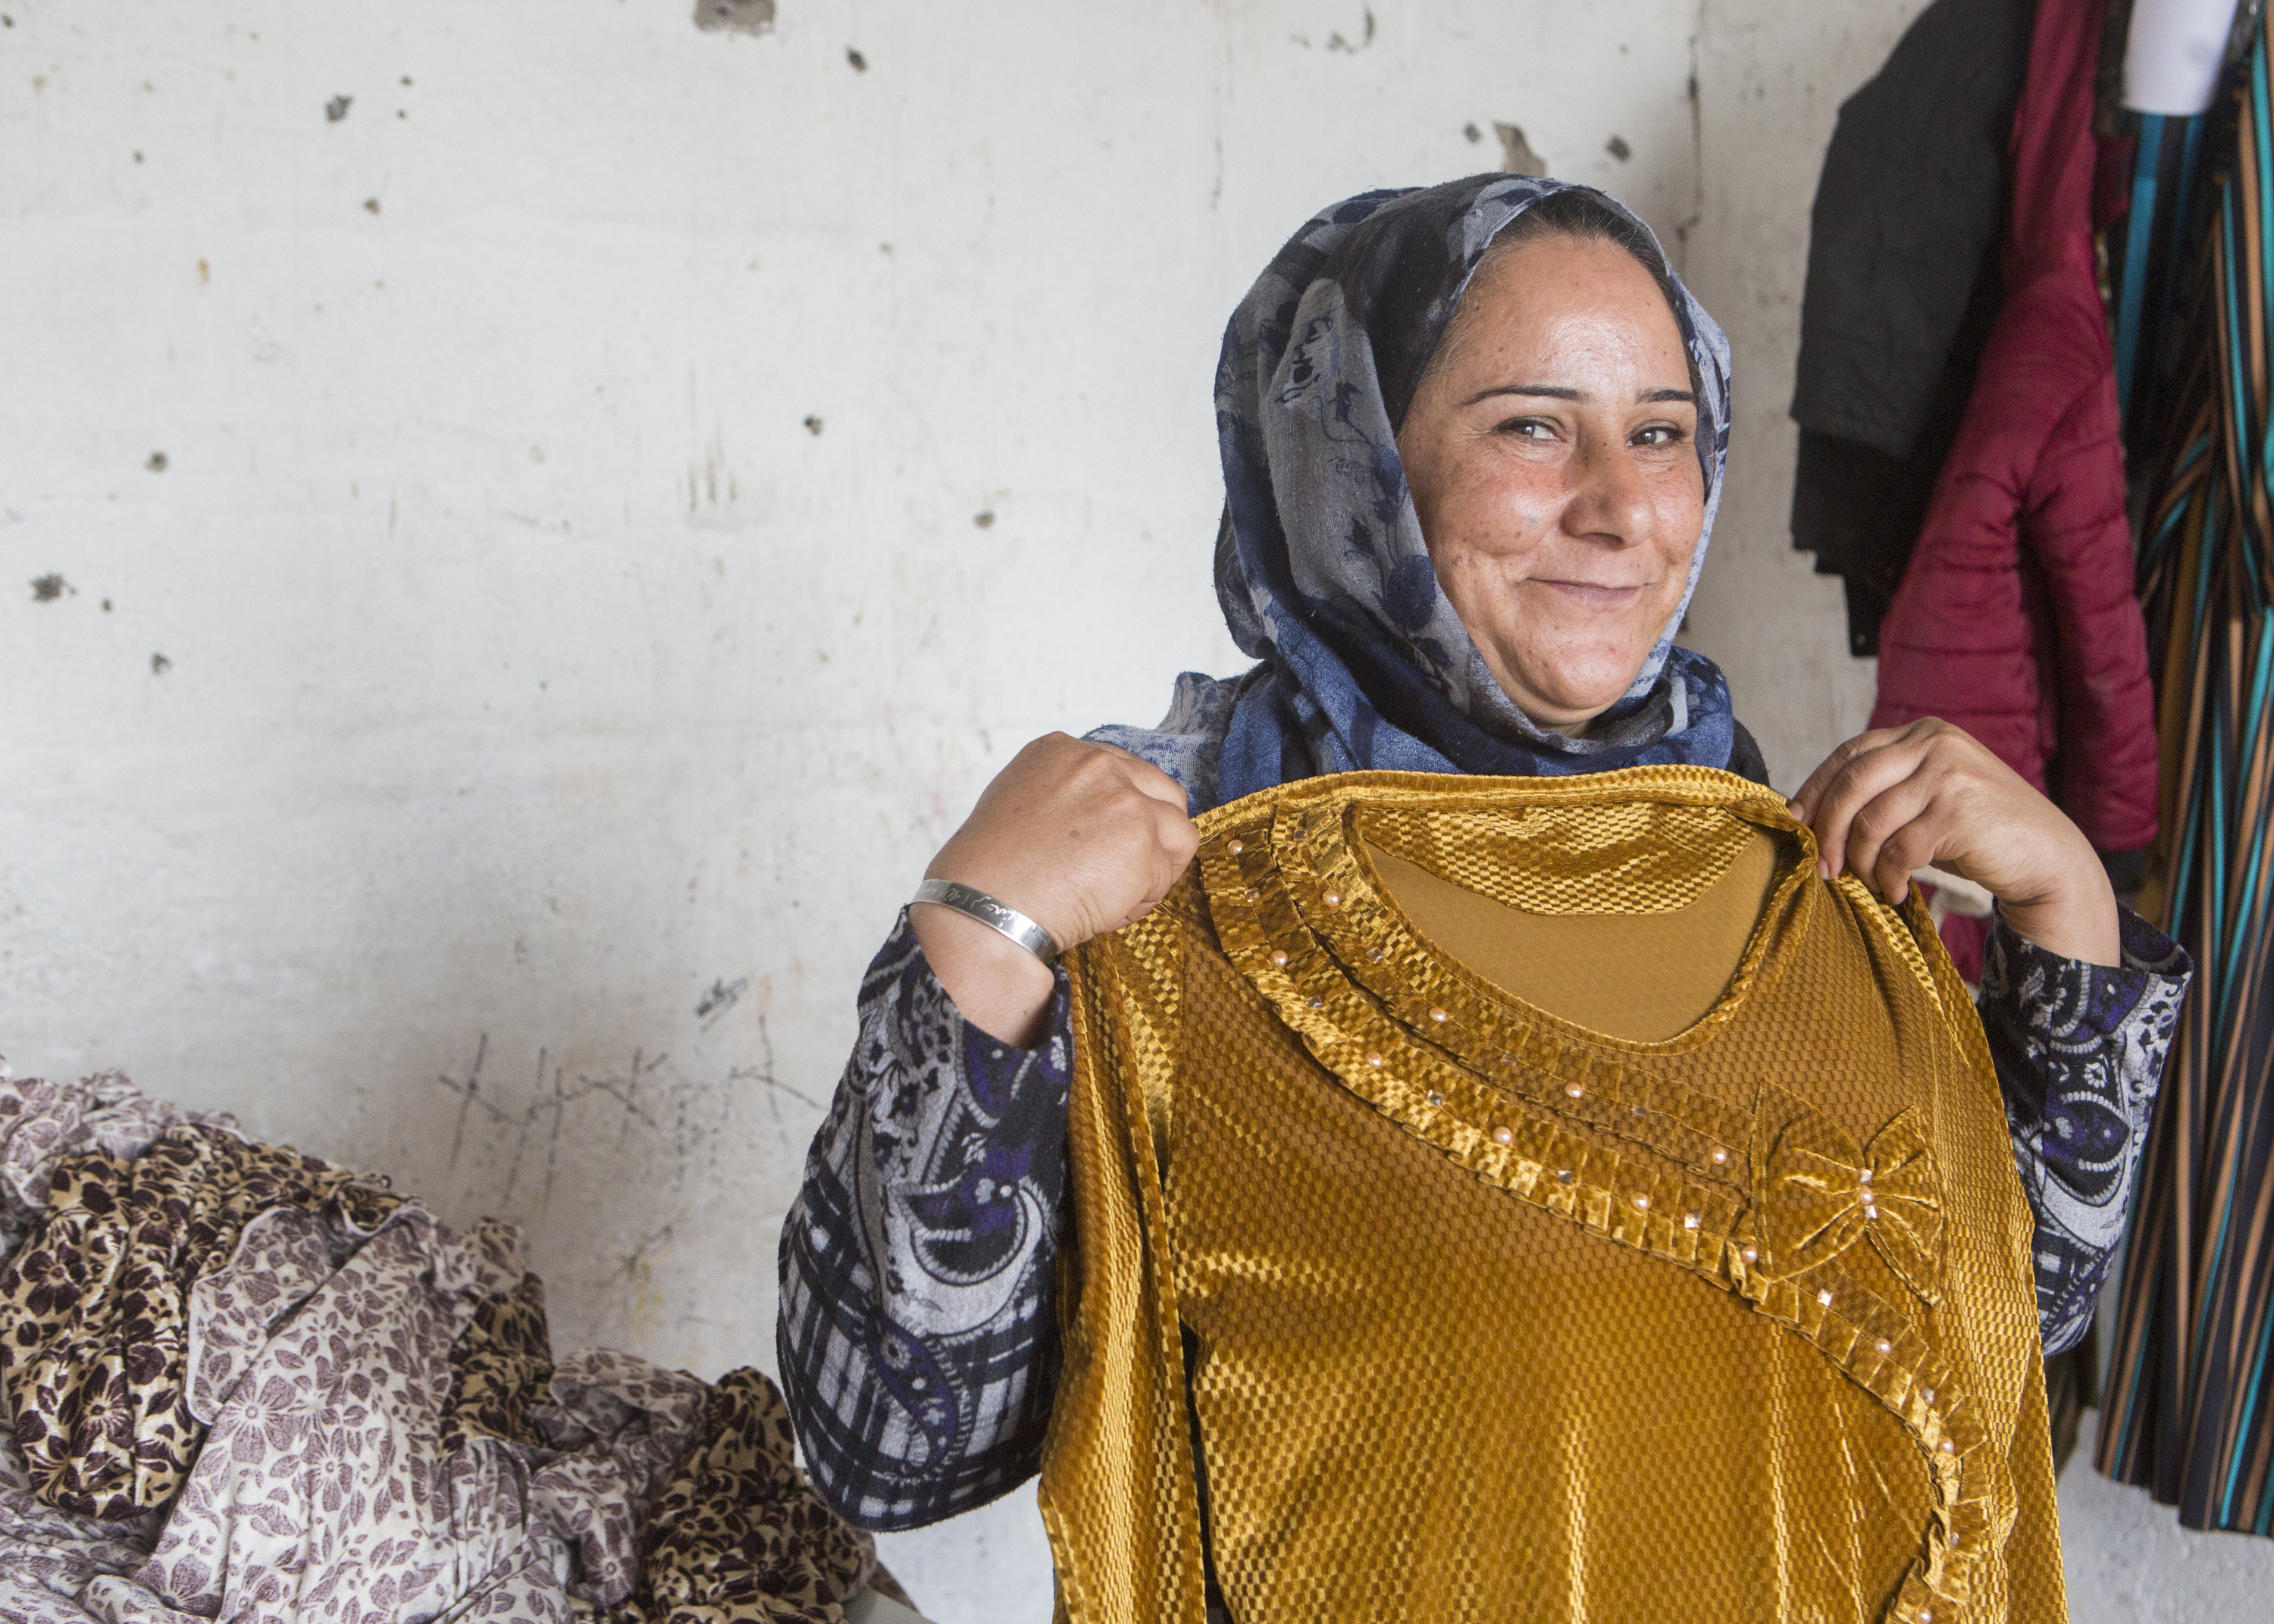 Shireen holding up a dress she made using the skills she learnt during the Stronger Women, Stronger Nations programme. Photo: Alison Baskerville.